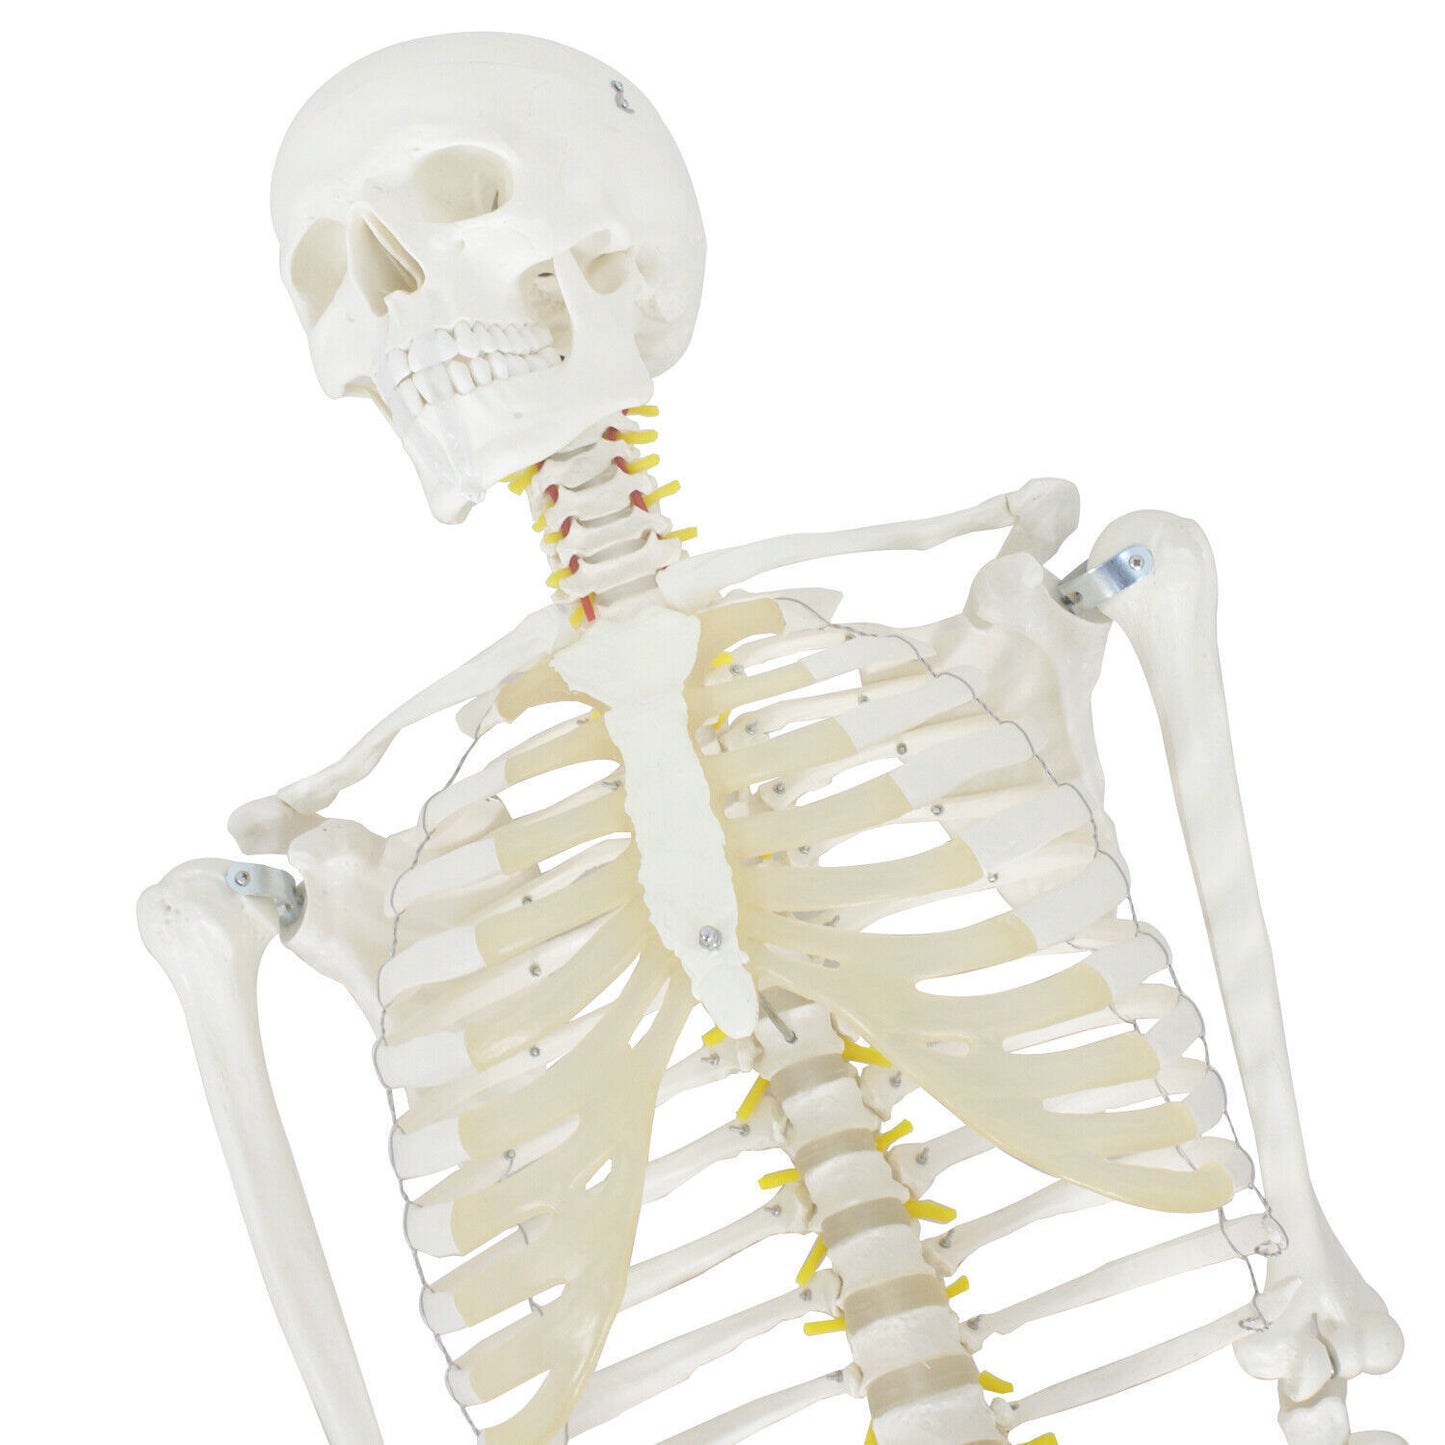 Life Size Anatomical Human Skeleton Model w/ Rolling Stand for Medical Lab 70.8"